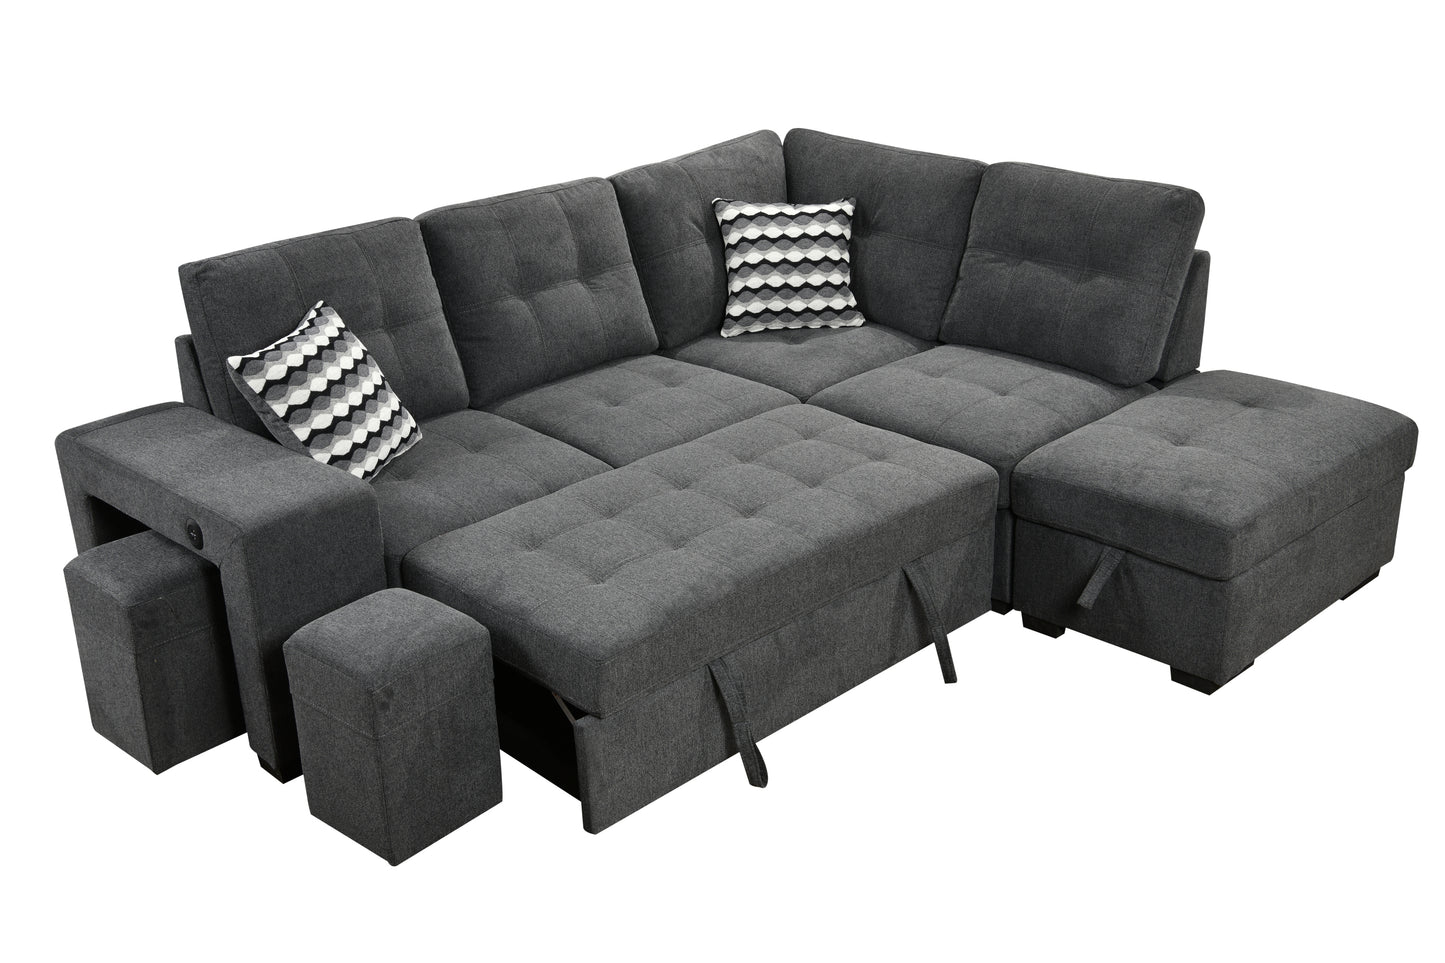 Sectional Pull Out Sofa Bed 101" Reversible L-Shaped Corner Sleeper Upholstered Couch with Storage Ottoman, 2 Pillows,USB Ports,2 Stools for Living Room Furniture Sets,Apartments,Dark Gray